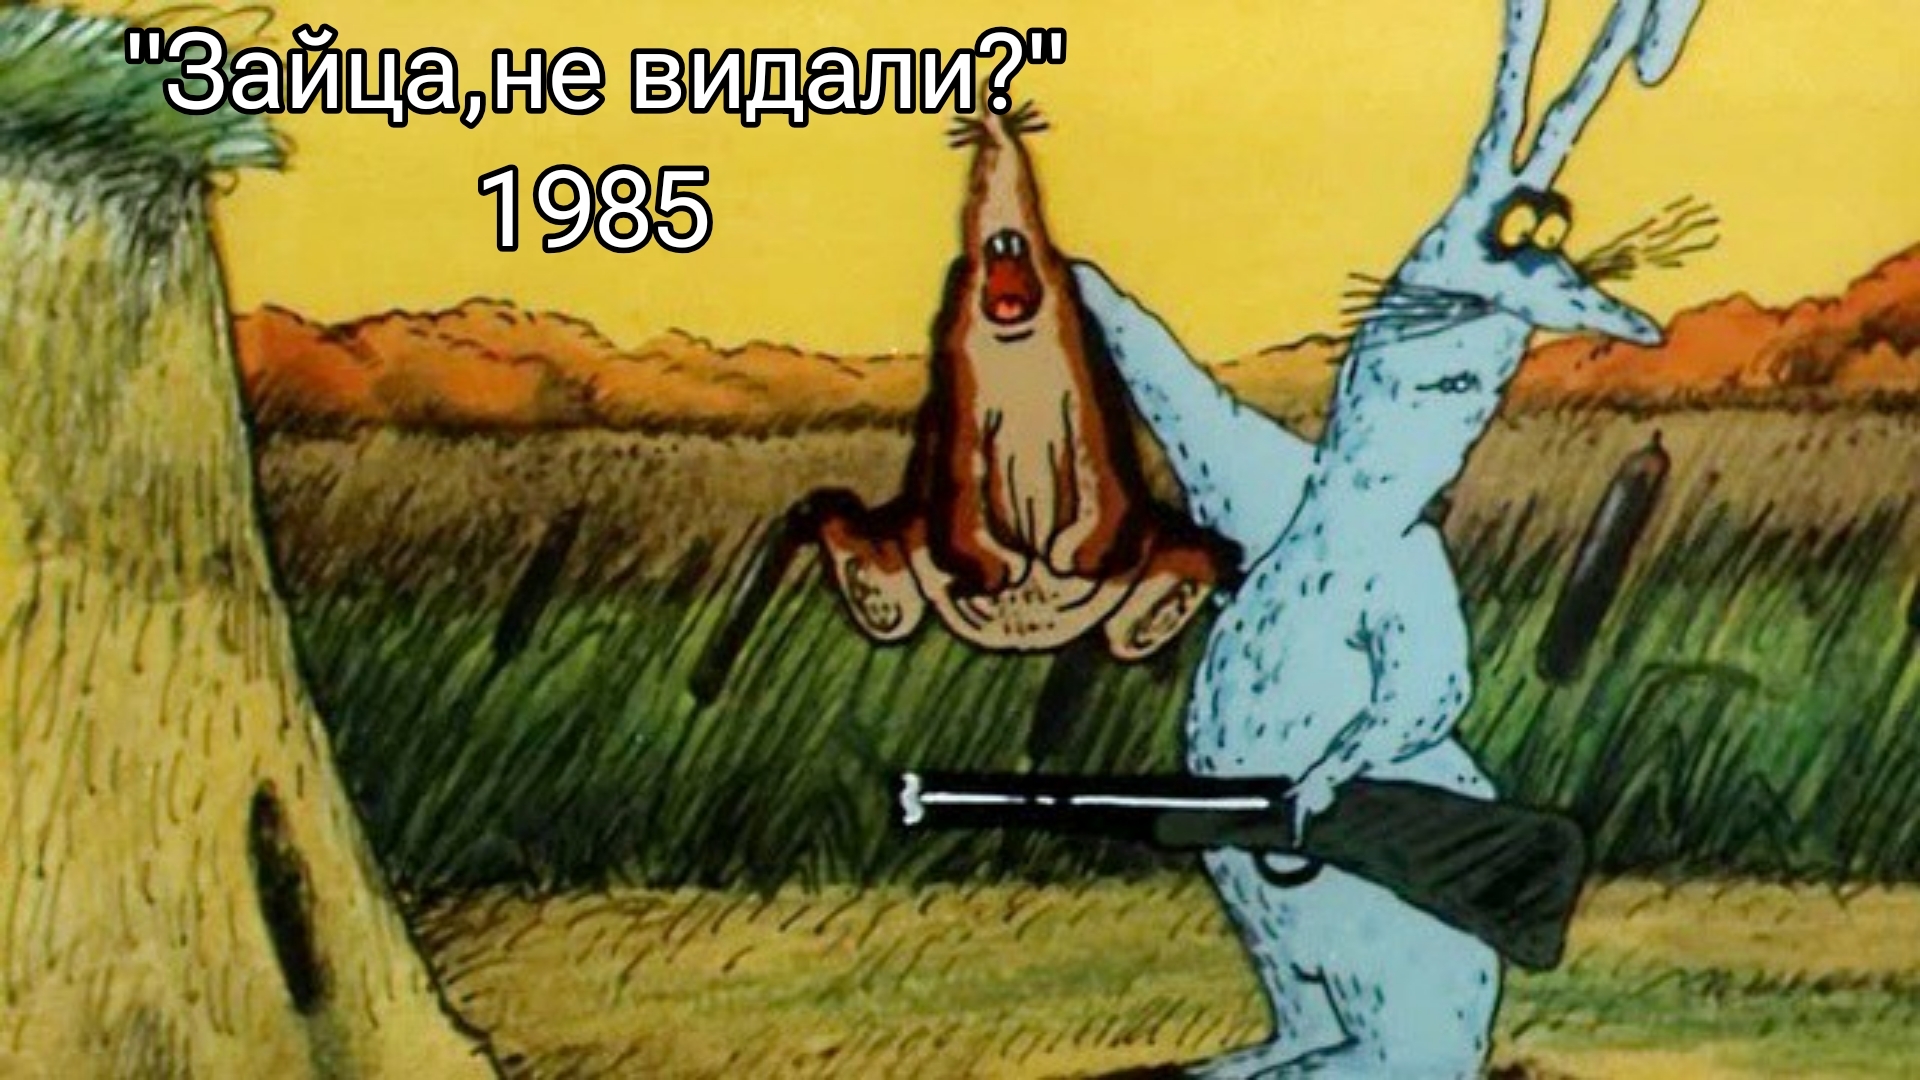 Some unusual domestic cartoons - Cartoons, 90th, Nostalgia, Longpost, Picture with text, 80-е